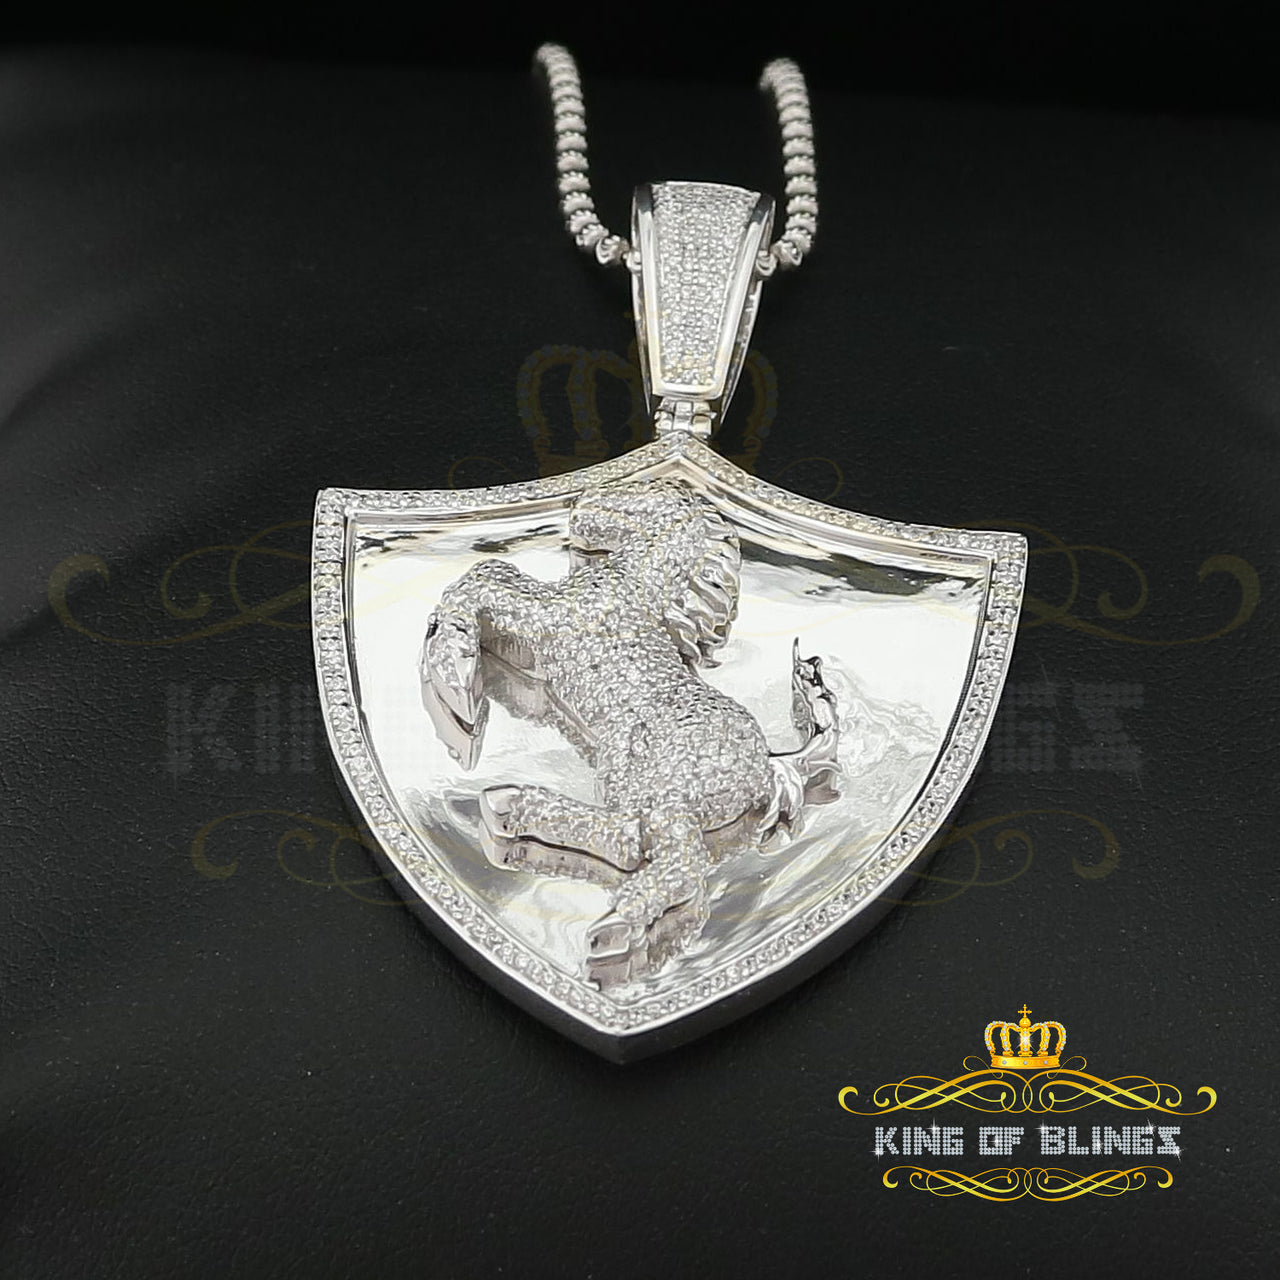 White 925 Sterling Silver Horse Shield Shape Pendant 4.44ct Cubic Zirconia KING OF BLINGS